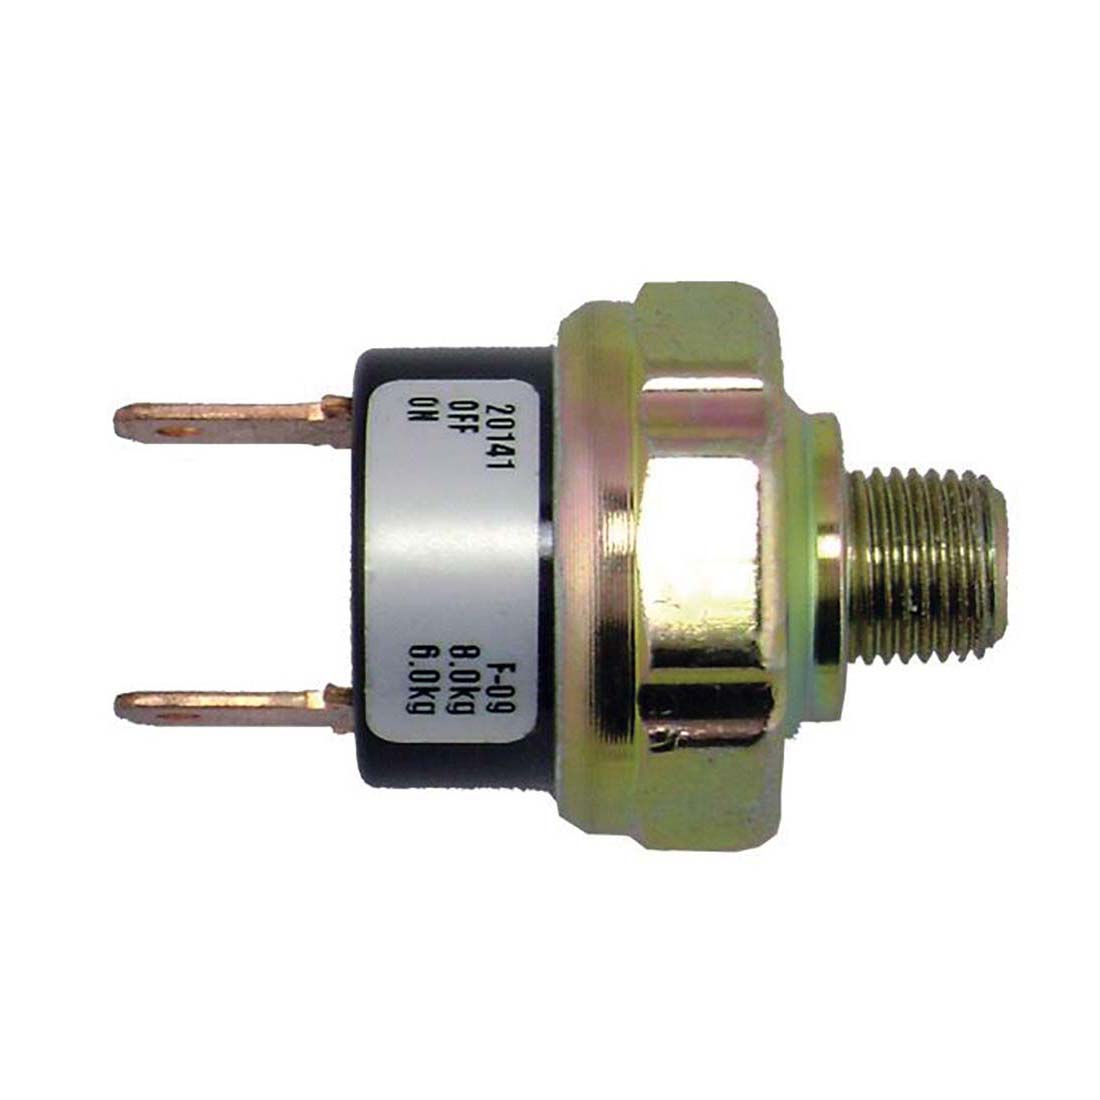 Excalibur AC-112-PS Replacement Pressure Switch for AC1.5 112psi